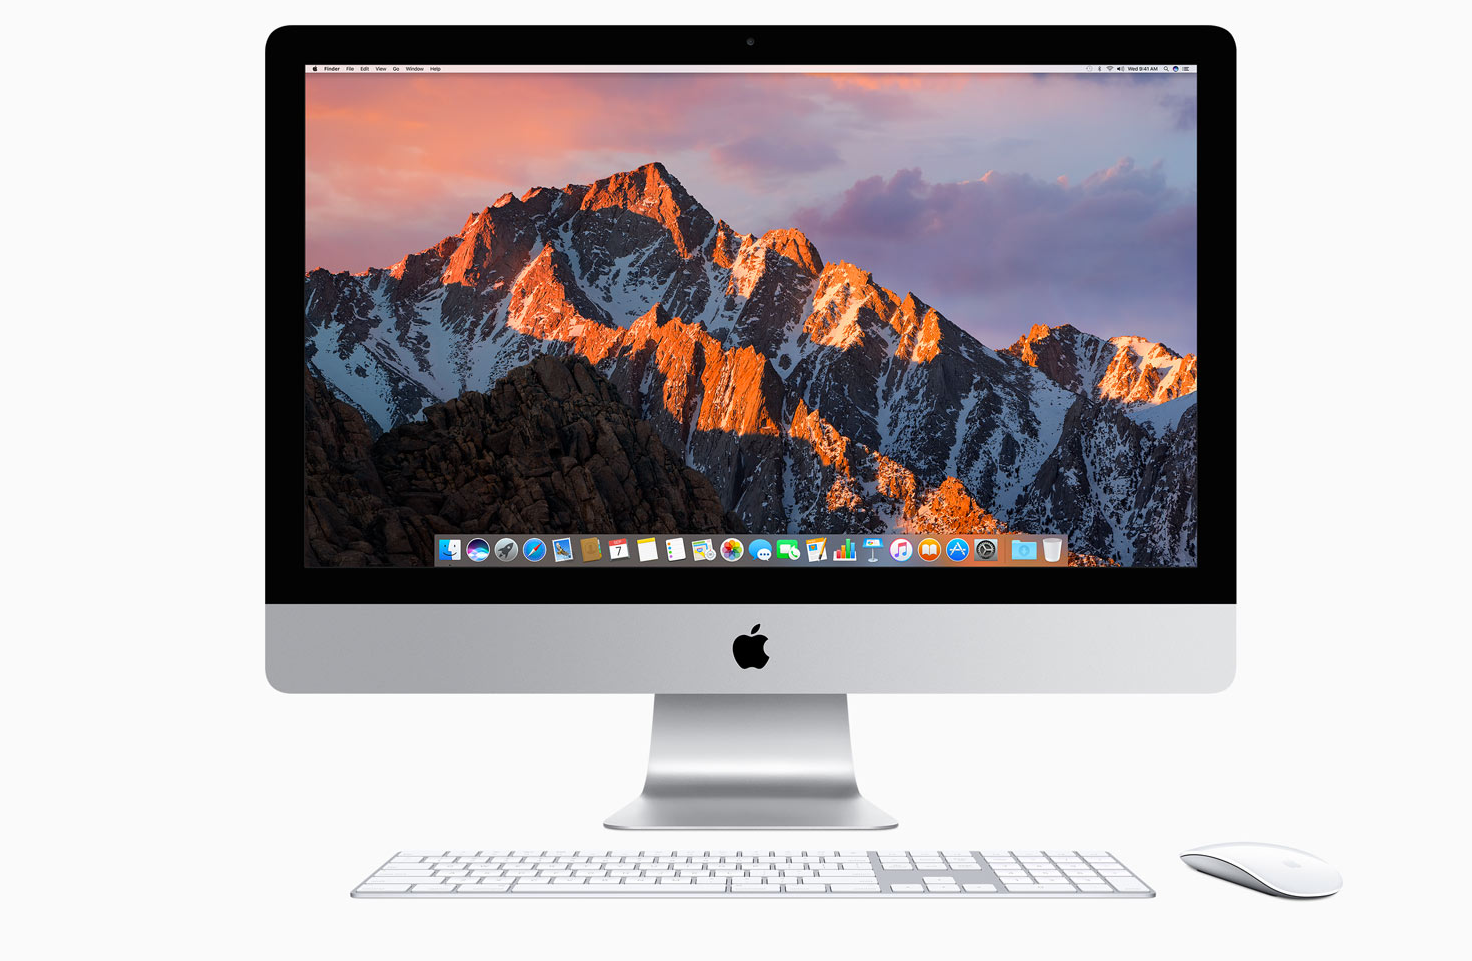 iMac 21.5-inch 4K (2017) Review | Trusted Reviews